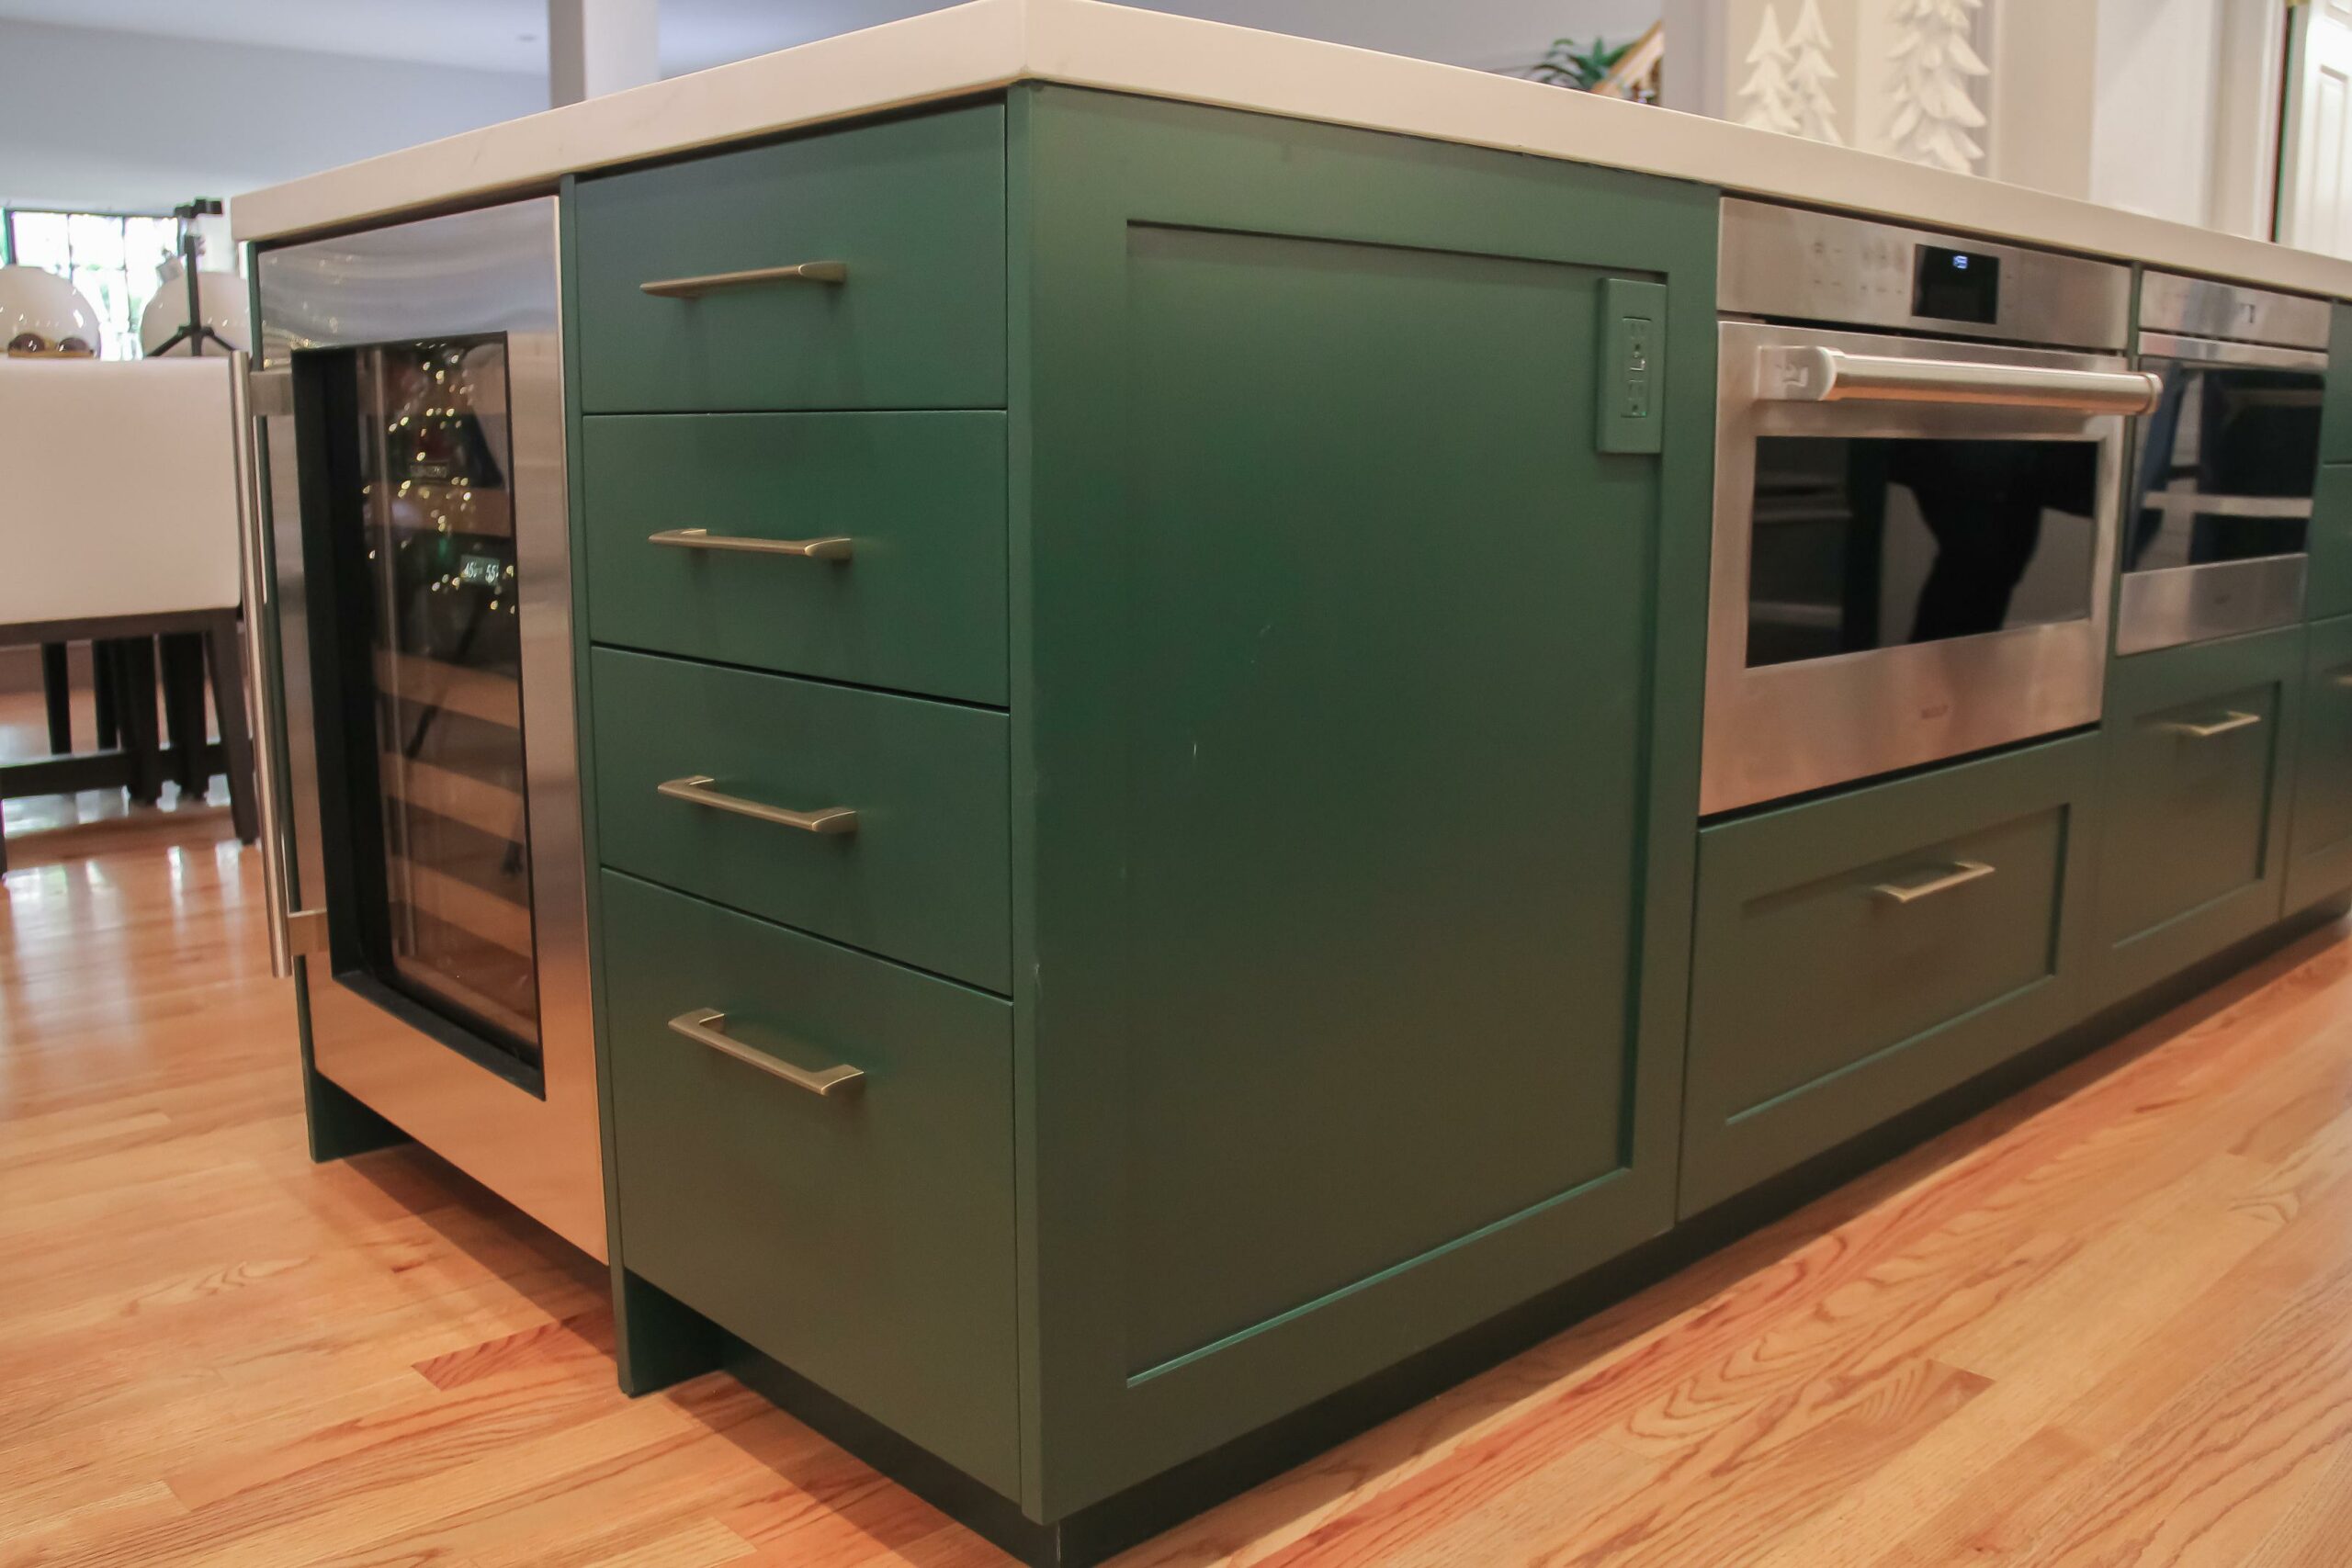 Modern green kitchen cabinets with stainless steel oven